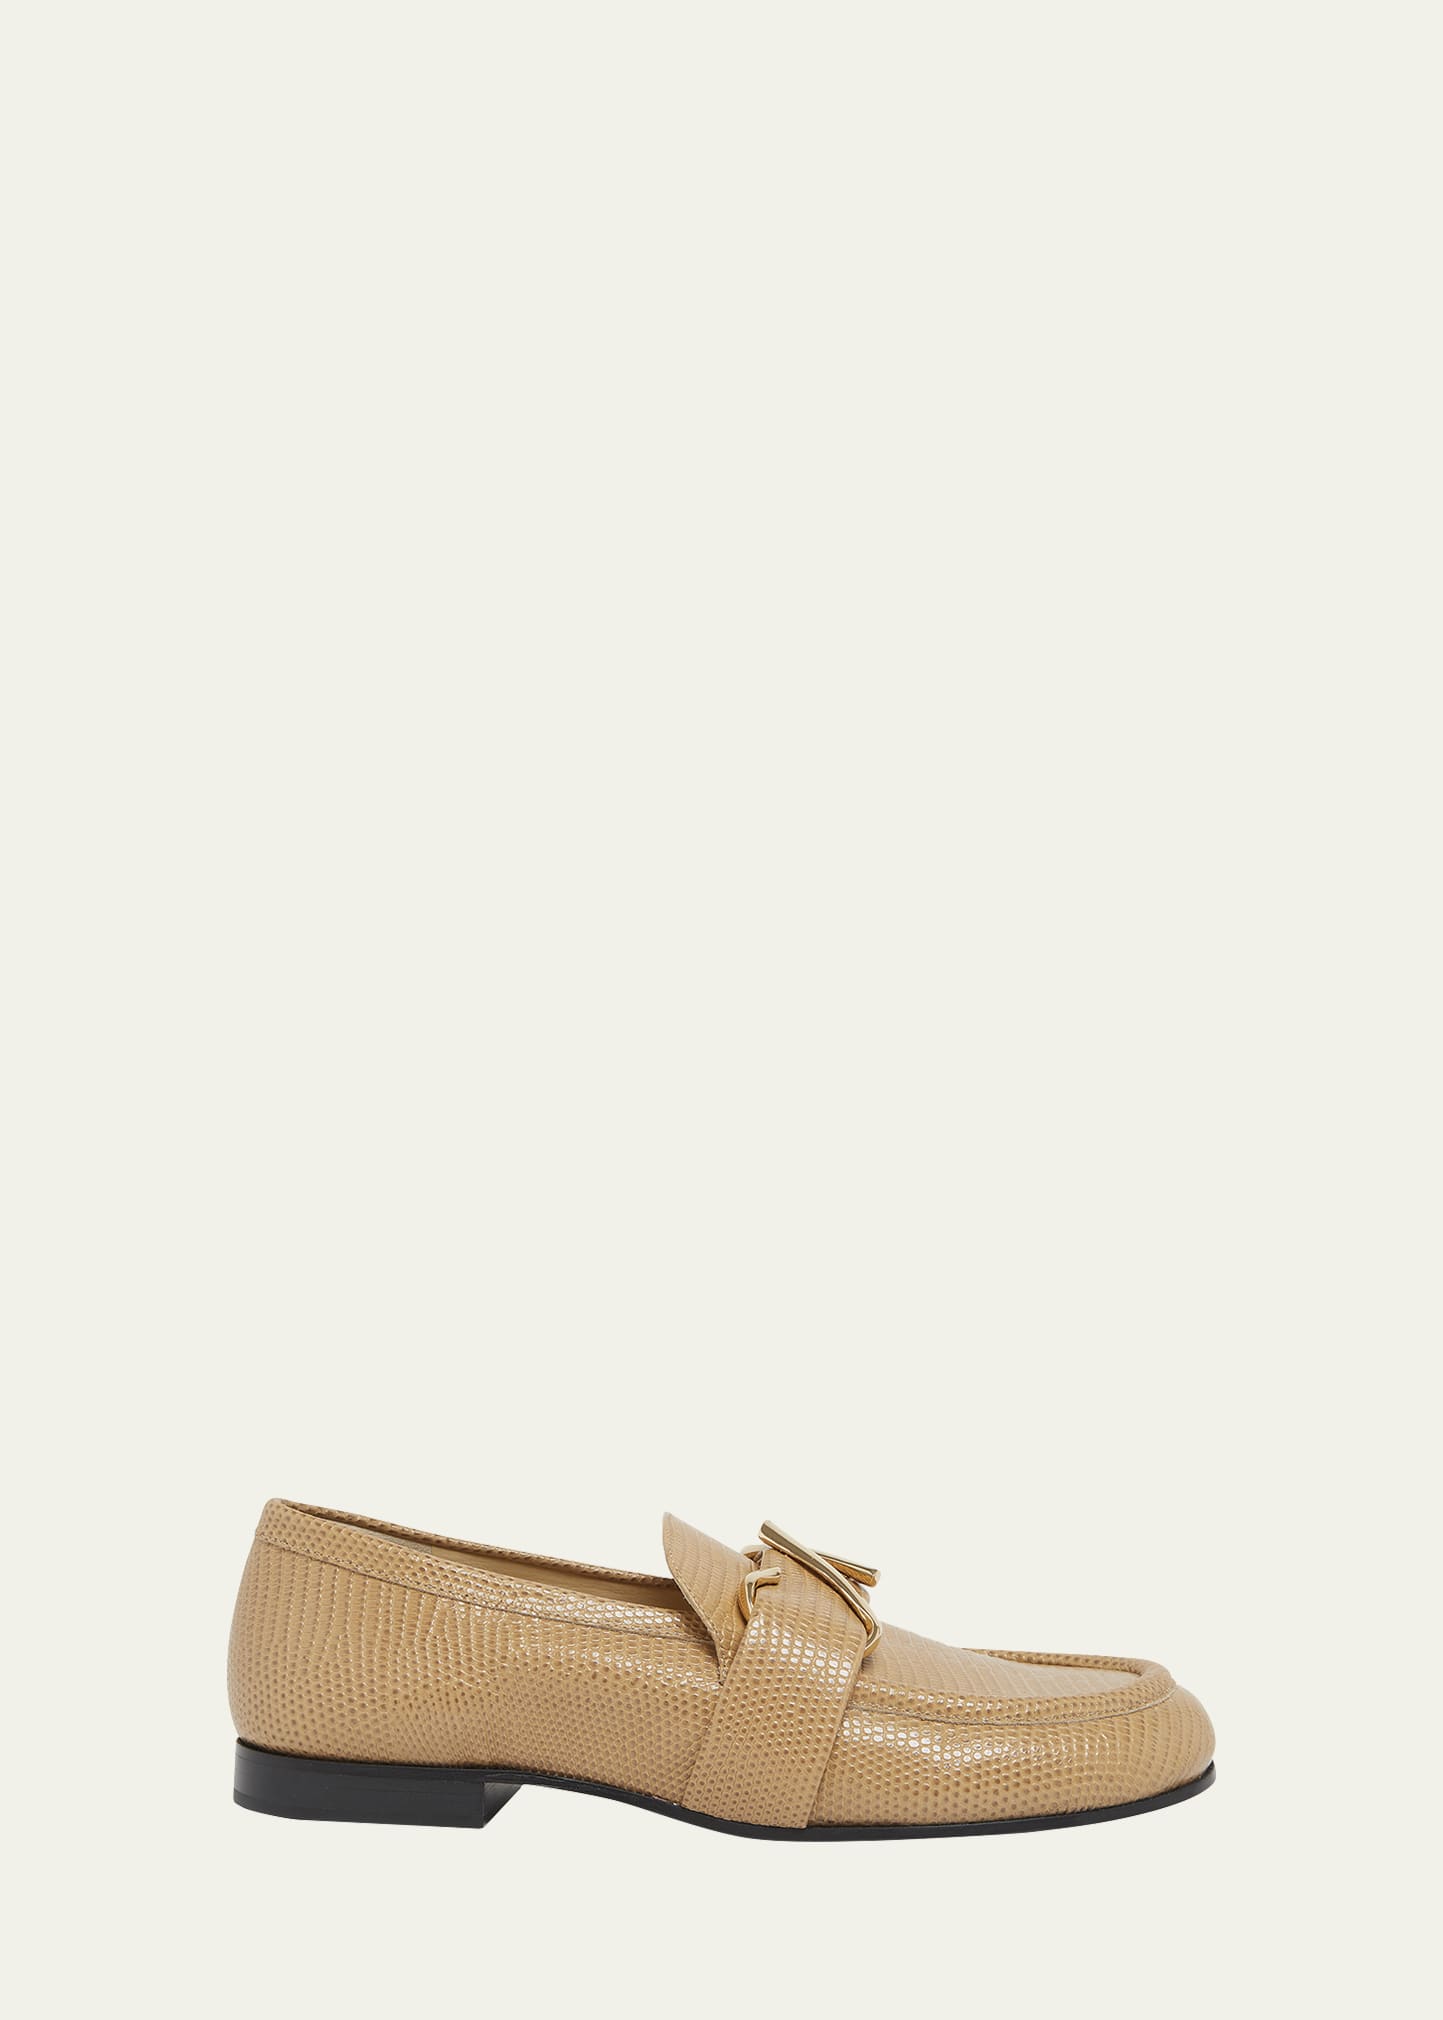 Proenza Schouler Leather Monogram Slip-On Loafers International Shipping